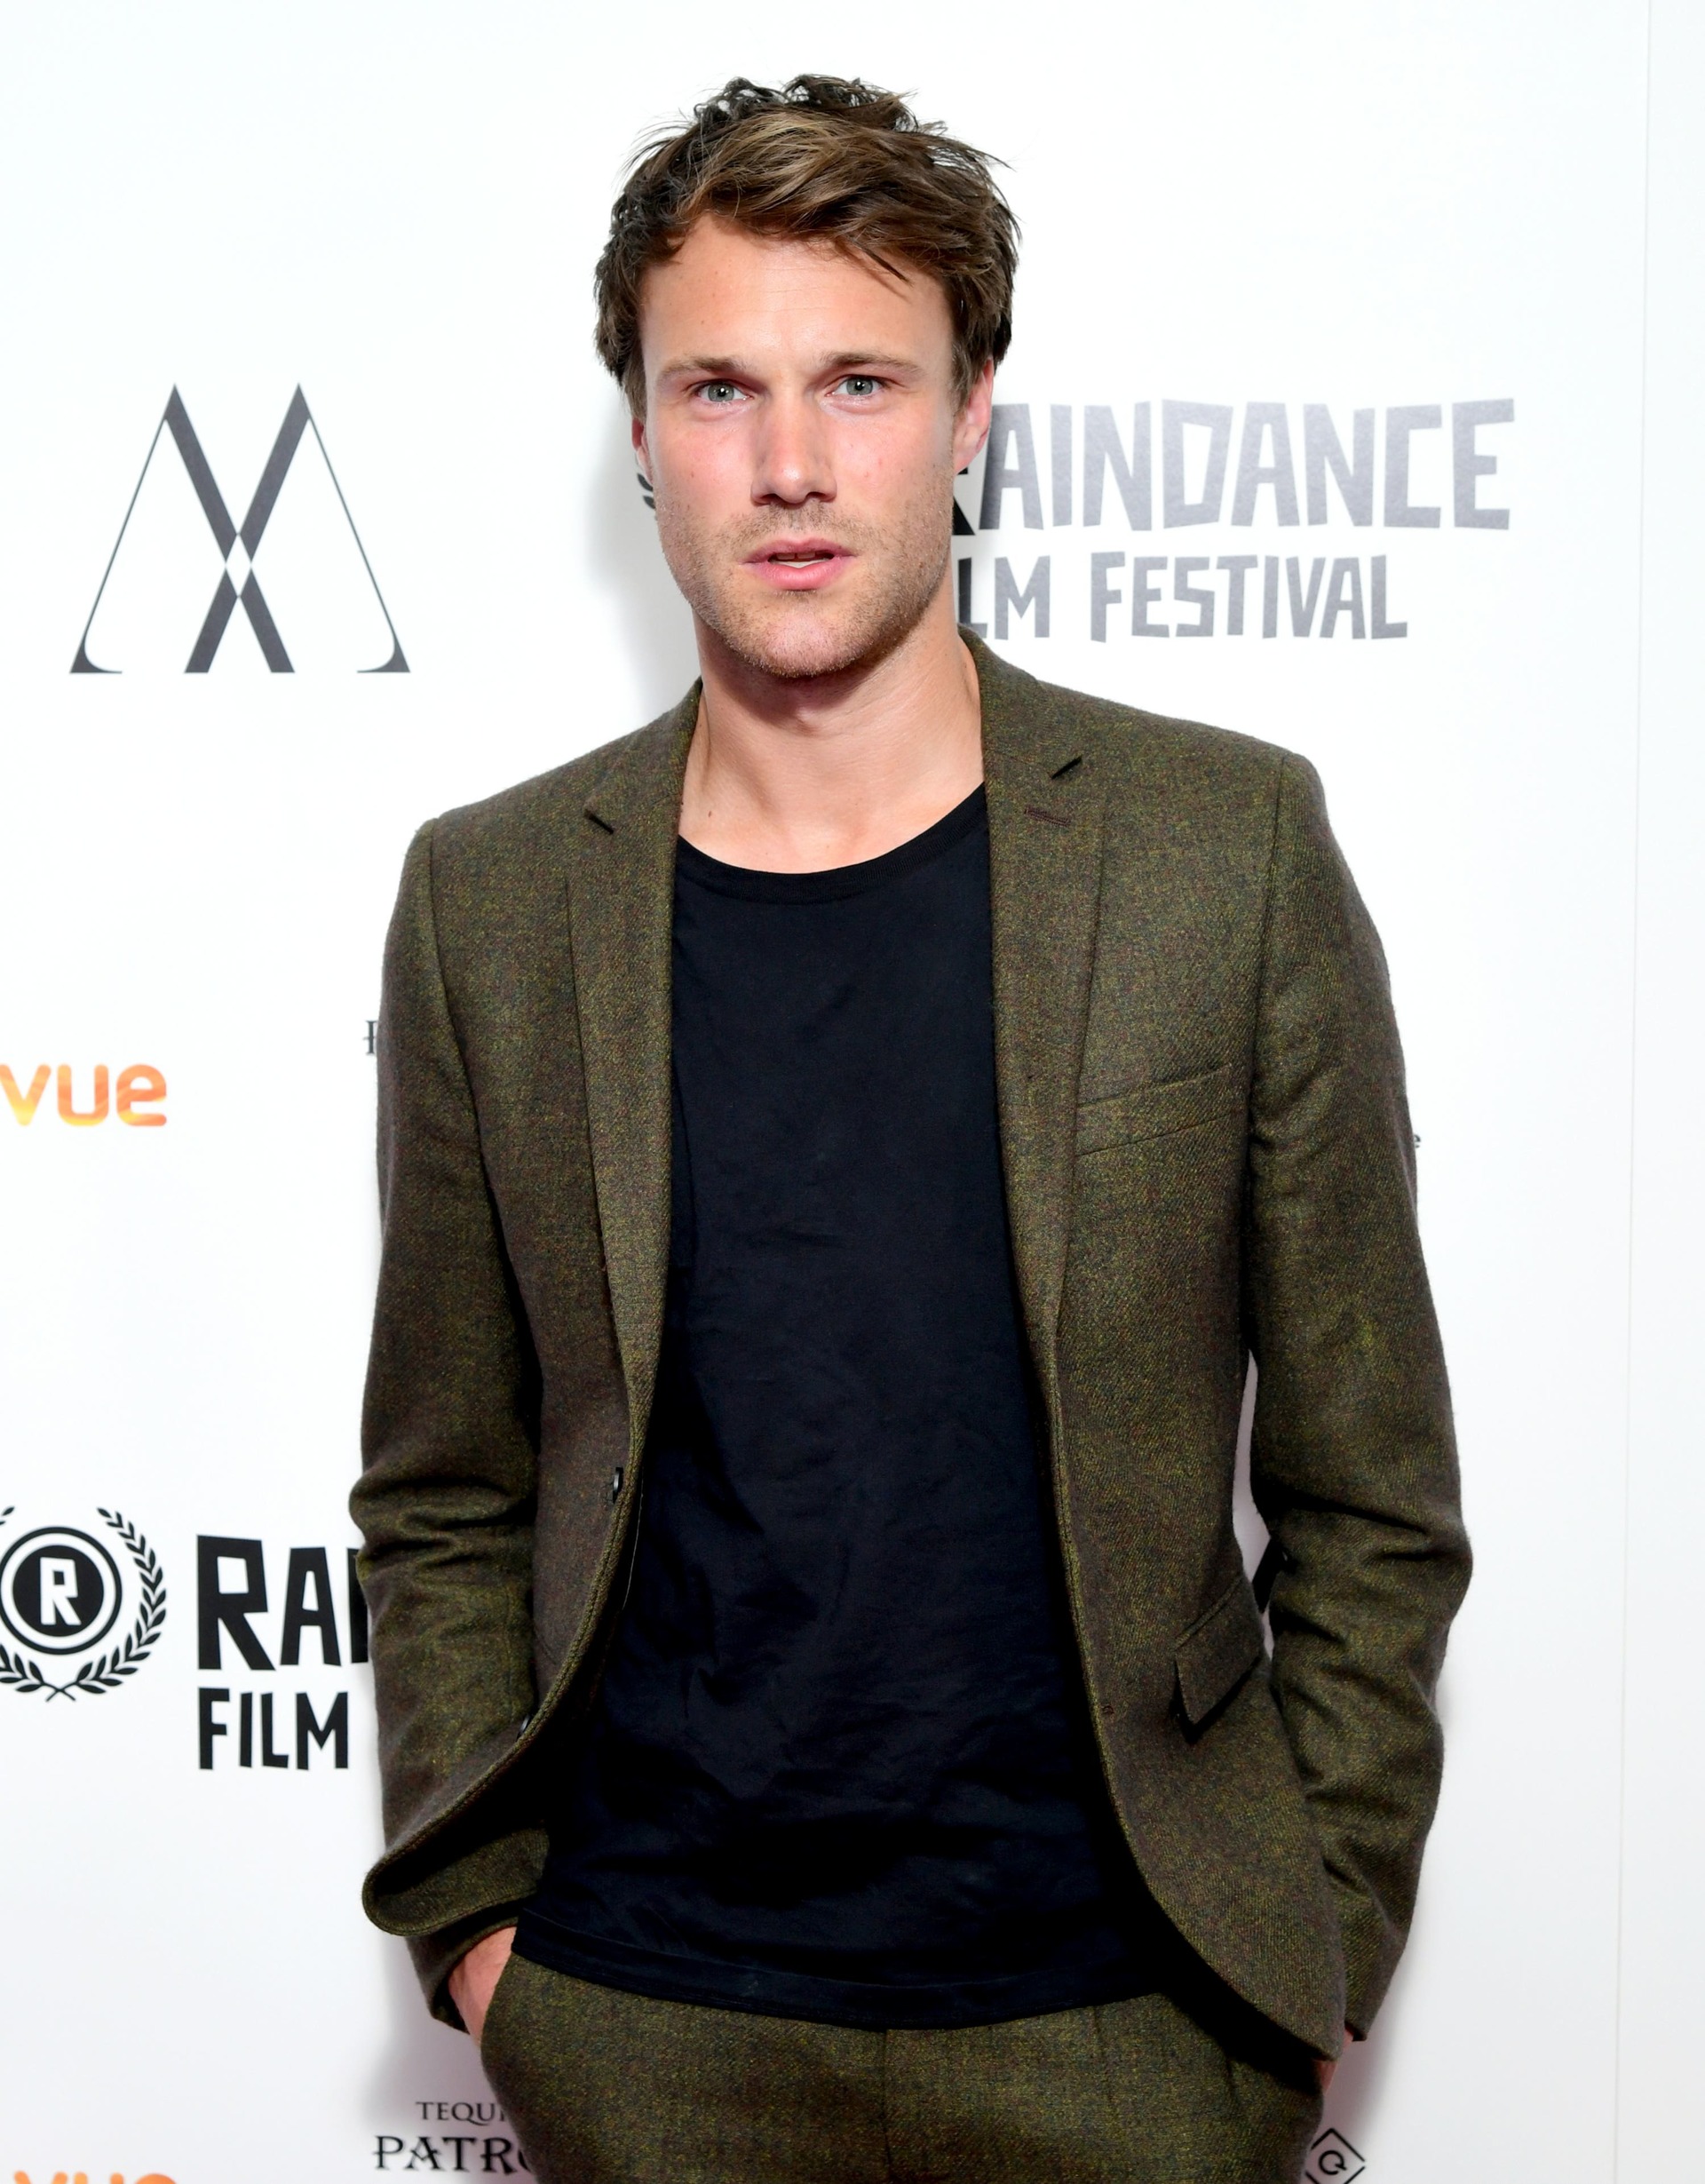 Hugh Skinner will also star in the production.